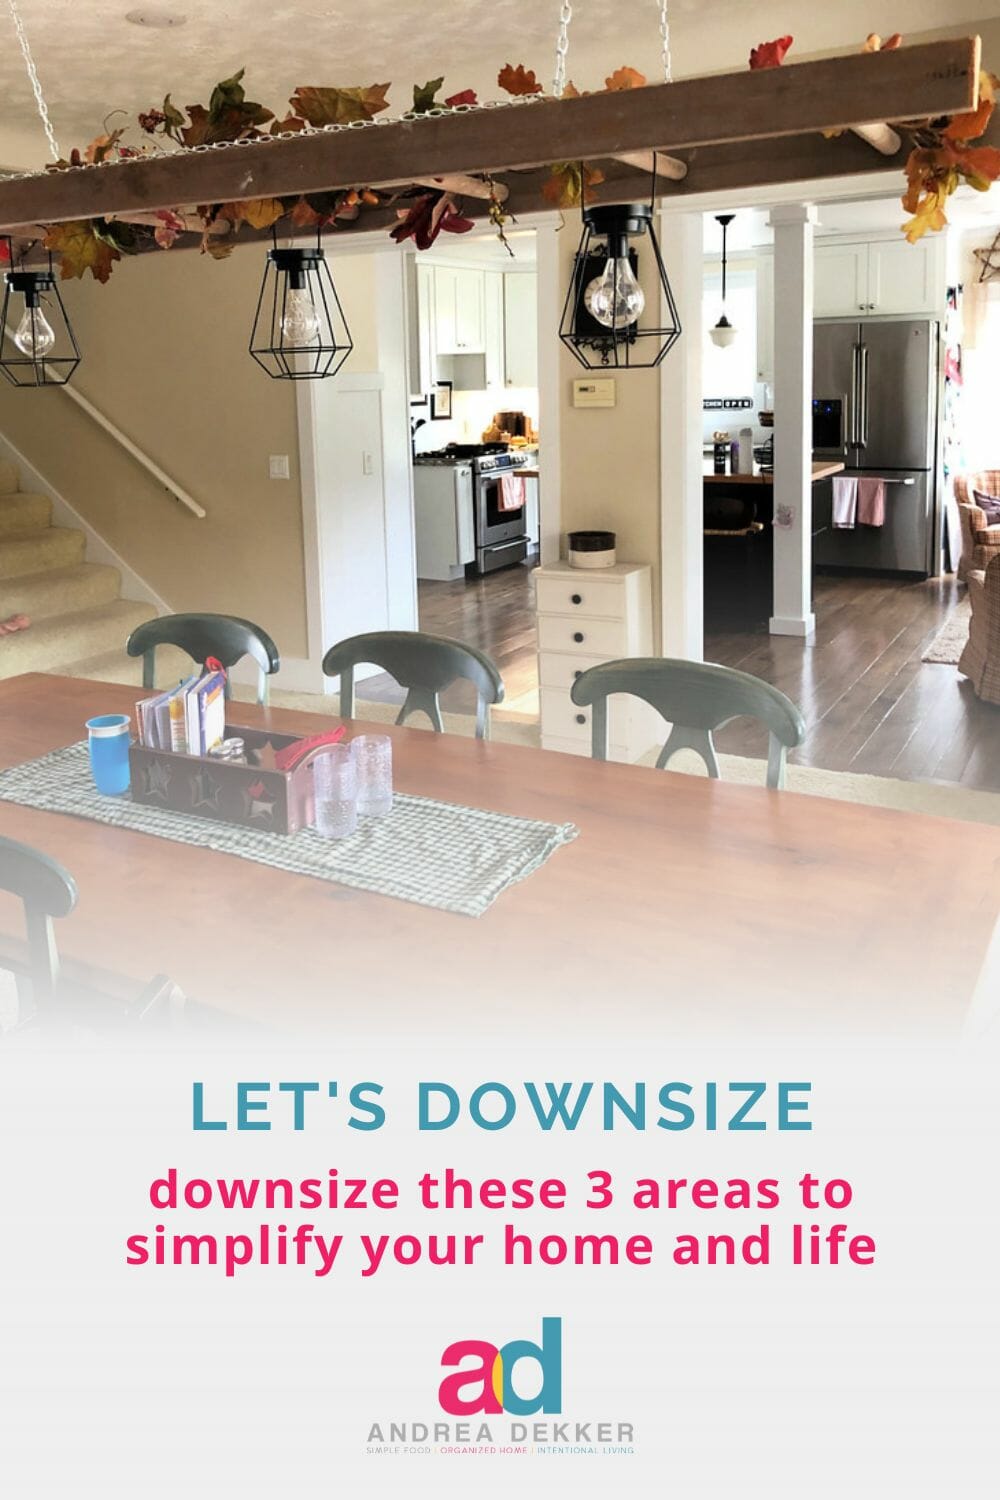 Downsize these 3 areas of your home and life and enjoy a simpler, slower, more intentional life -- starting today! via @andreadekker